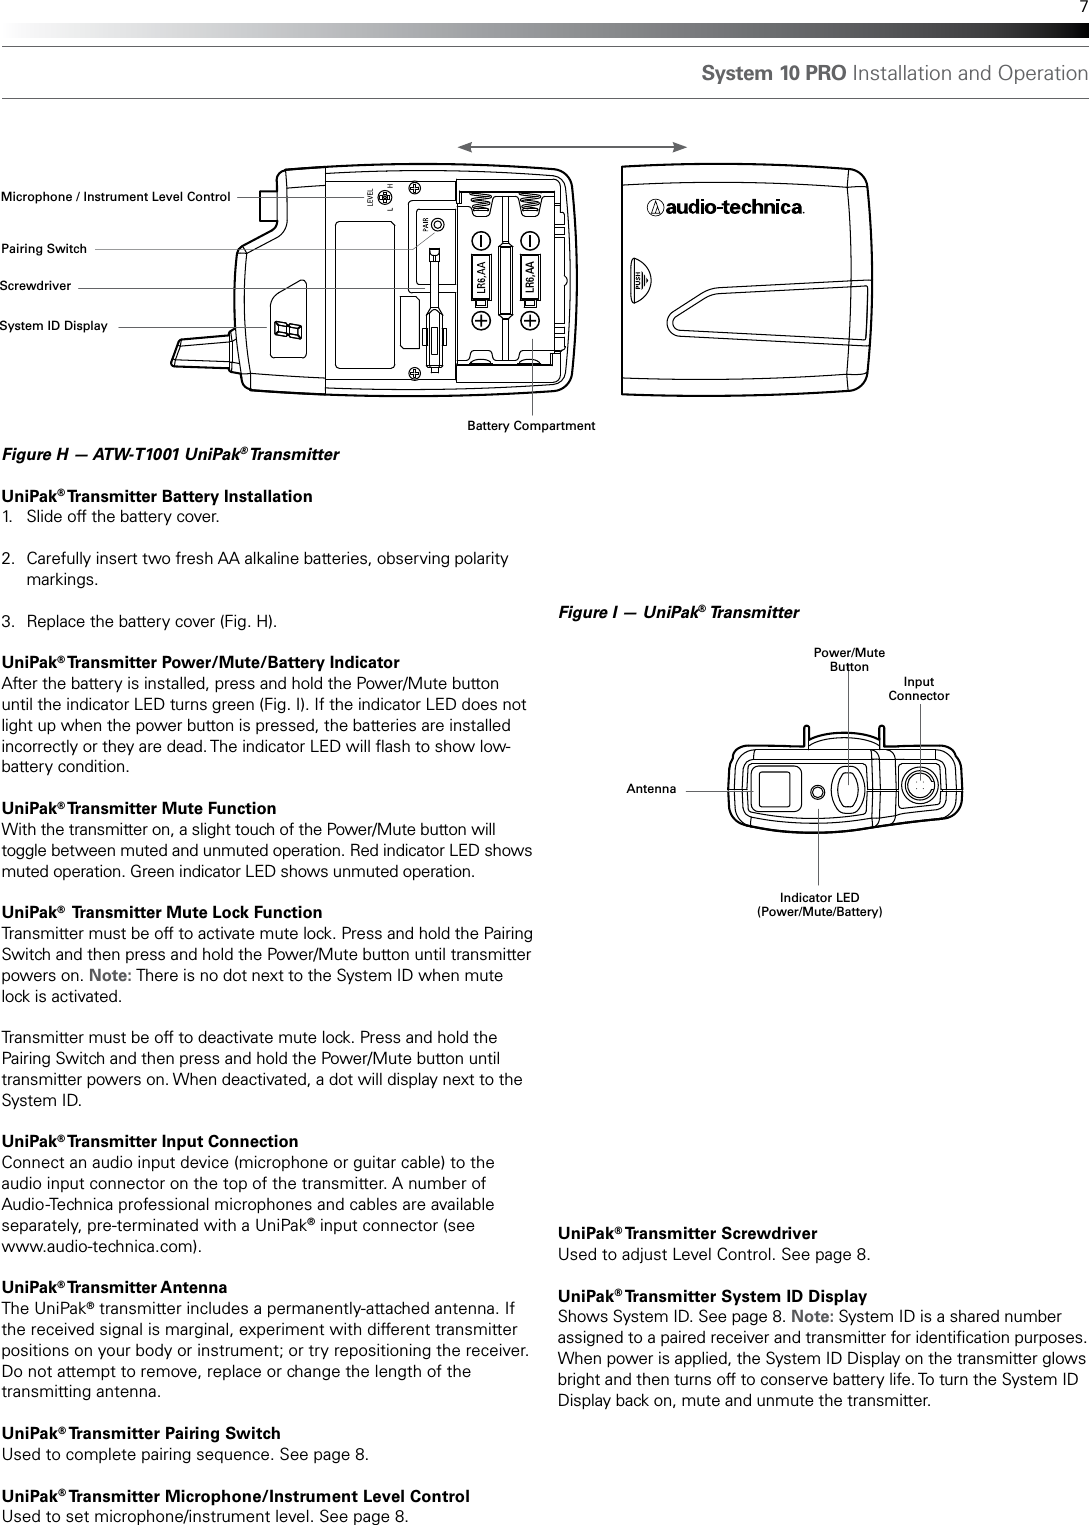 System 10 PRO Installation and Operation 7Figure H — ATW-T1001 UniPak® Transmitter UniPak® Transmitter Battery Installation1.  Slide off the battery cover.2.  Carefully insert two fresh AA alkaline batteries, observing polarity  markings.3.  Replace the battery cover (Fig. H).UniPak® Transmitter Power/Mute/Battery IndicatorAfter the battery is installed, press and hold the Power/Mute button until the indicator LED turns green (Fig. I). If the indicator LED does not light up when the power button is pressed, the batteries are installed incorrectly or they are dead. The indicator LED will ash to show low-battery condition. UniPak® Transmitter Mute FunctionWith the transmitter on, a slight touch of the Power/Mute button will toggle between muted and unmuted operation. Red indicator LED shows muted operation. Green indicator LED shows unmuted operation.UniPak®  Transmitter Mute Lock FunctionTransmitter must be off to activate mute lock. Press and hold the Pairing Switch and then press and hold the Power/Mute button until transmitter powers on. Note: There is no dot next to the System ID when mute lock is activated.Transmitter must be off to deactivate mute lock. Press and hold the Pairing Switch and then press and hold the Power/Mute button until transmitter powers on. When deactivated, a dot will display next to the System ID.UniPak® Transmitter Input ConnectionConnect an audio input device (microphone or guitar cable) to the audio input connector on the top of the transmitter. A number of Audio-Technica professional microphones and cables are available separately, pre-terminated with a UniPak® input connector (see  www.audio-technica.com). UniPak® Transmitter AntennaThe UniPak® transmitter includes a permanently-attached antenna. If the received signal is marginal, experiment with different transmitter positions on your body or instrument; or try repositioning the receiver. Do not attempt to remove, replace or change the length of the transmitting antenna. UniPak® Transmitter Pairing SwitchUsed to complete pairing sequence. See page 8.UniPak® Transmitter Microphone/Instrument Level ControlUsed to set microphone/instrument level. See page 8.LR6,AAFigure I — UniPak® TransmitterAntennaInput ConnectorPower/Mute ButtonSystem ID DisplayScrewdriverMicrophone / Instrument Level ControlPairing SwitchIndicator LED(Power/Mute/Battery)Battery CompartmentUniPak® Transmitter  ScrewdriverUsed to adjust Level Control. See page 8.UniPak® Transmitter System ID DisplayShows System ID. See page 8. Note: System ID is a shared number assigned to a paired receiver and transmitter for identication purposes. When power is applied, the System ID Display on the transmitter glows bright and then turns off to conserve battery life. To turn the System ID Display back on, mute and unmute the transmitter.